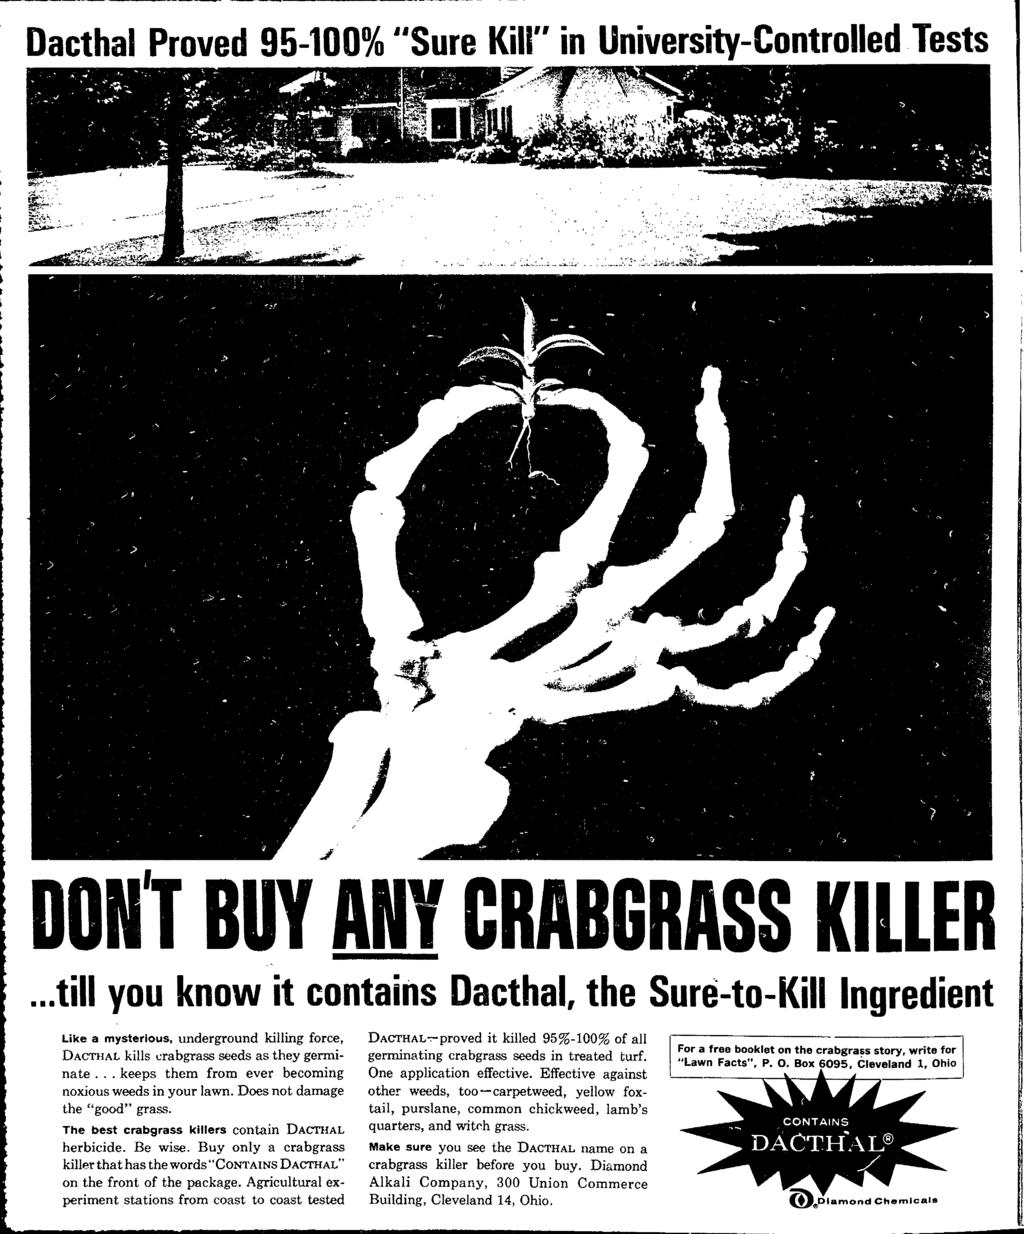 Daethal Proved 95-100% "Sure Kill" in University-Controlled Tests J DON', BUY ANY CRABGRASS KLLER till you know it contains Daethal, the Sure-to-Kill ngredient Like a mysterious, tmderground killing